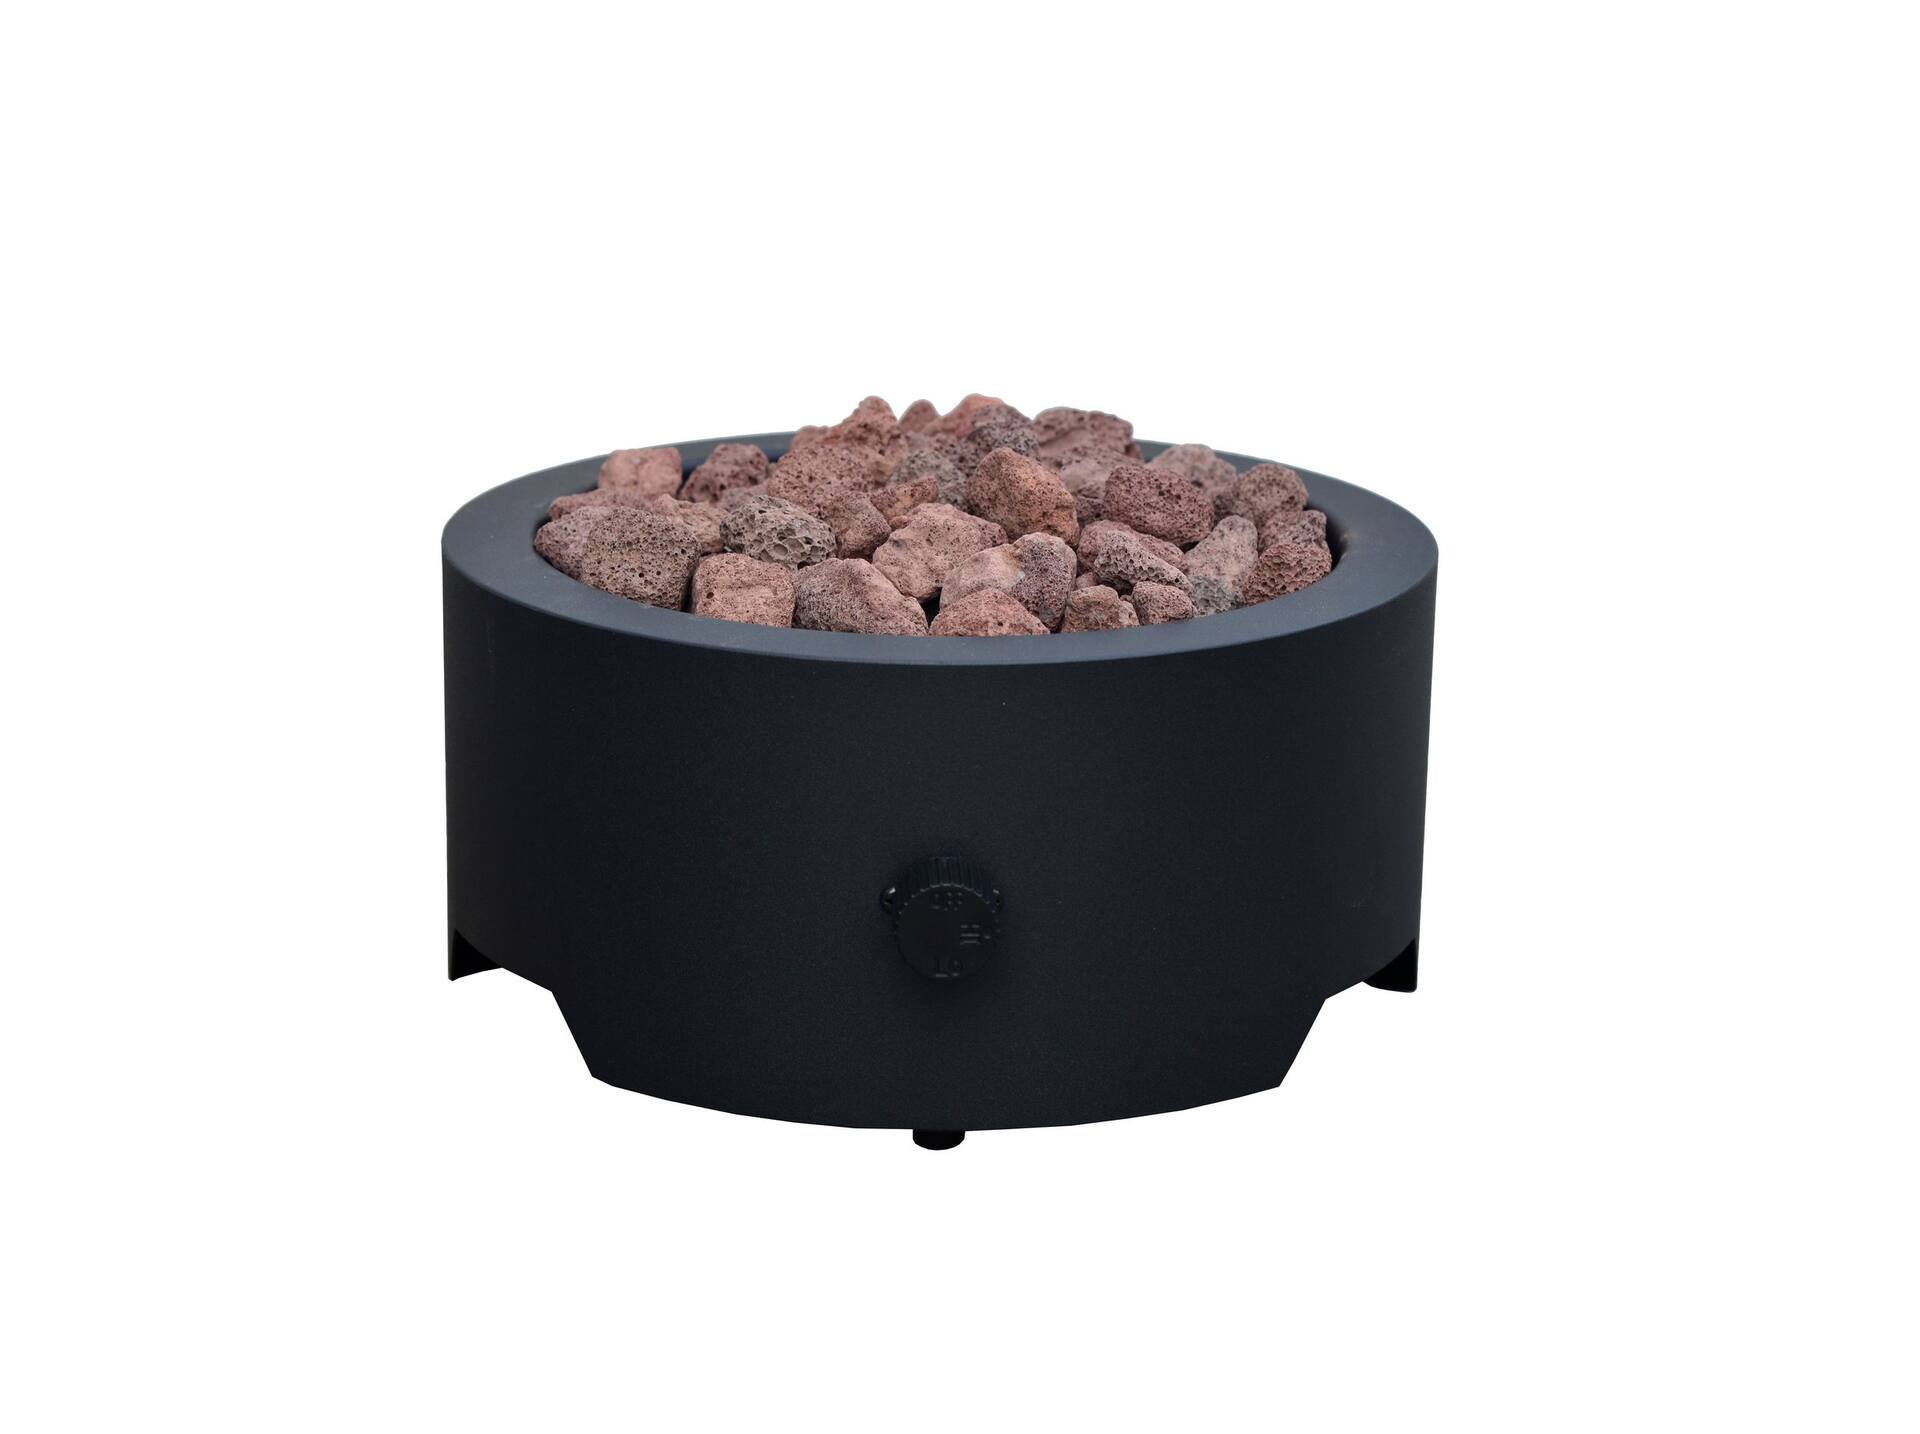 For Living Table Top Propane Gas Outdoor Fire Bowl/ Fire Pit